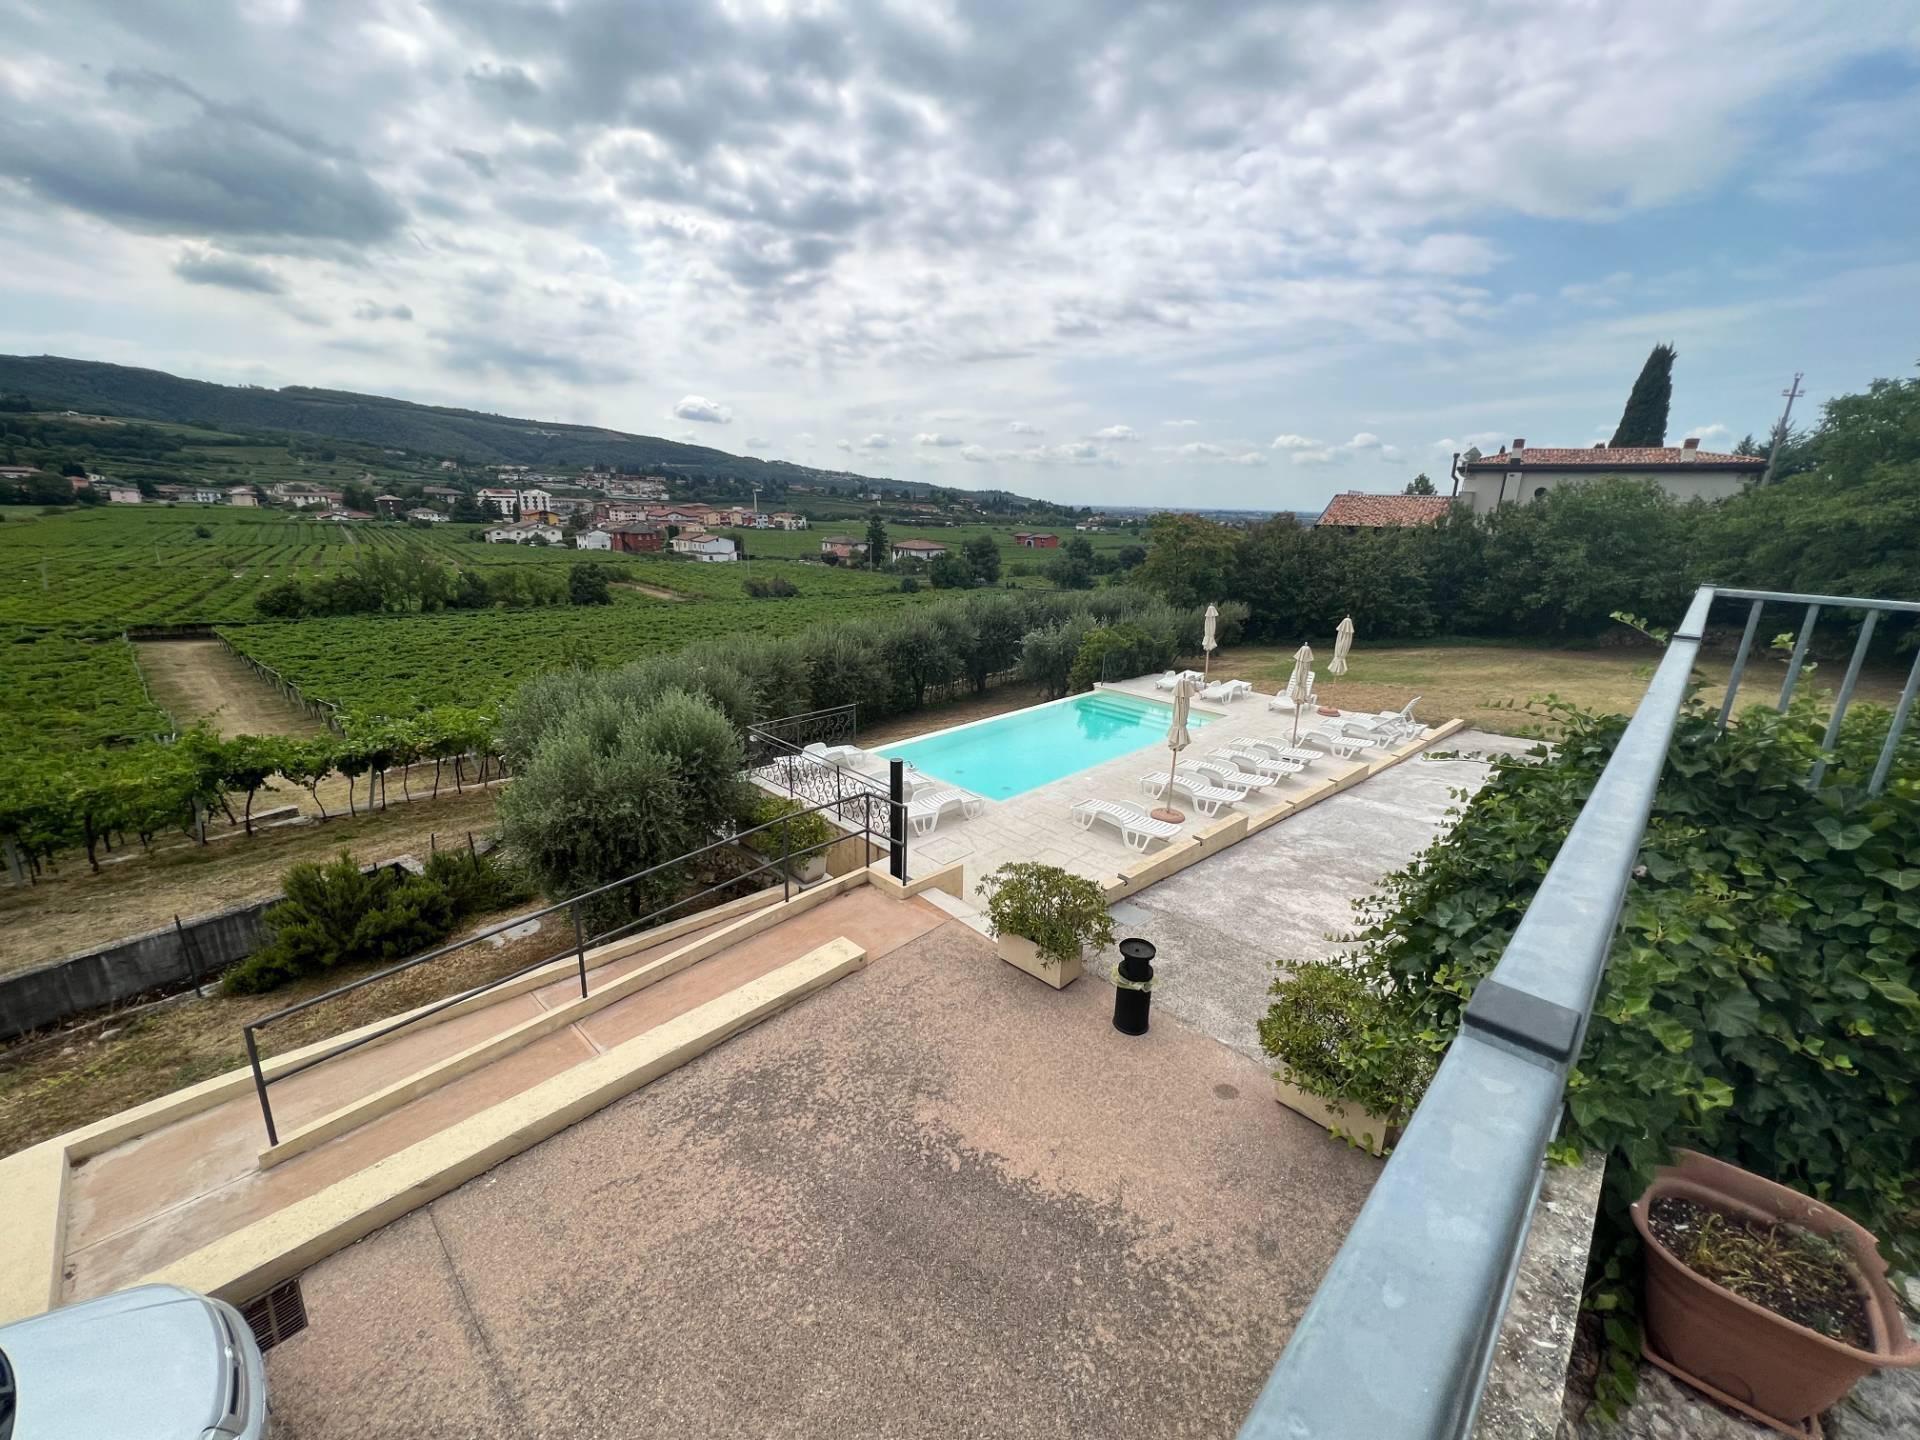 Villa used as charming hotel on the Valpolicella hills - 10